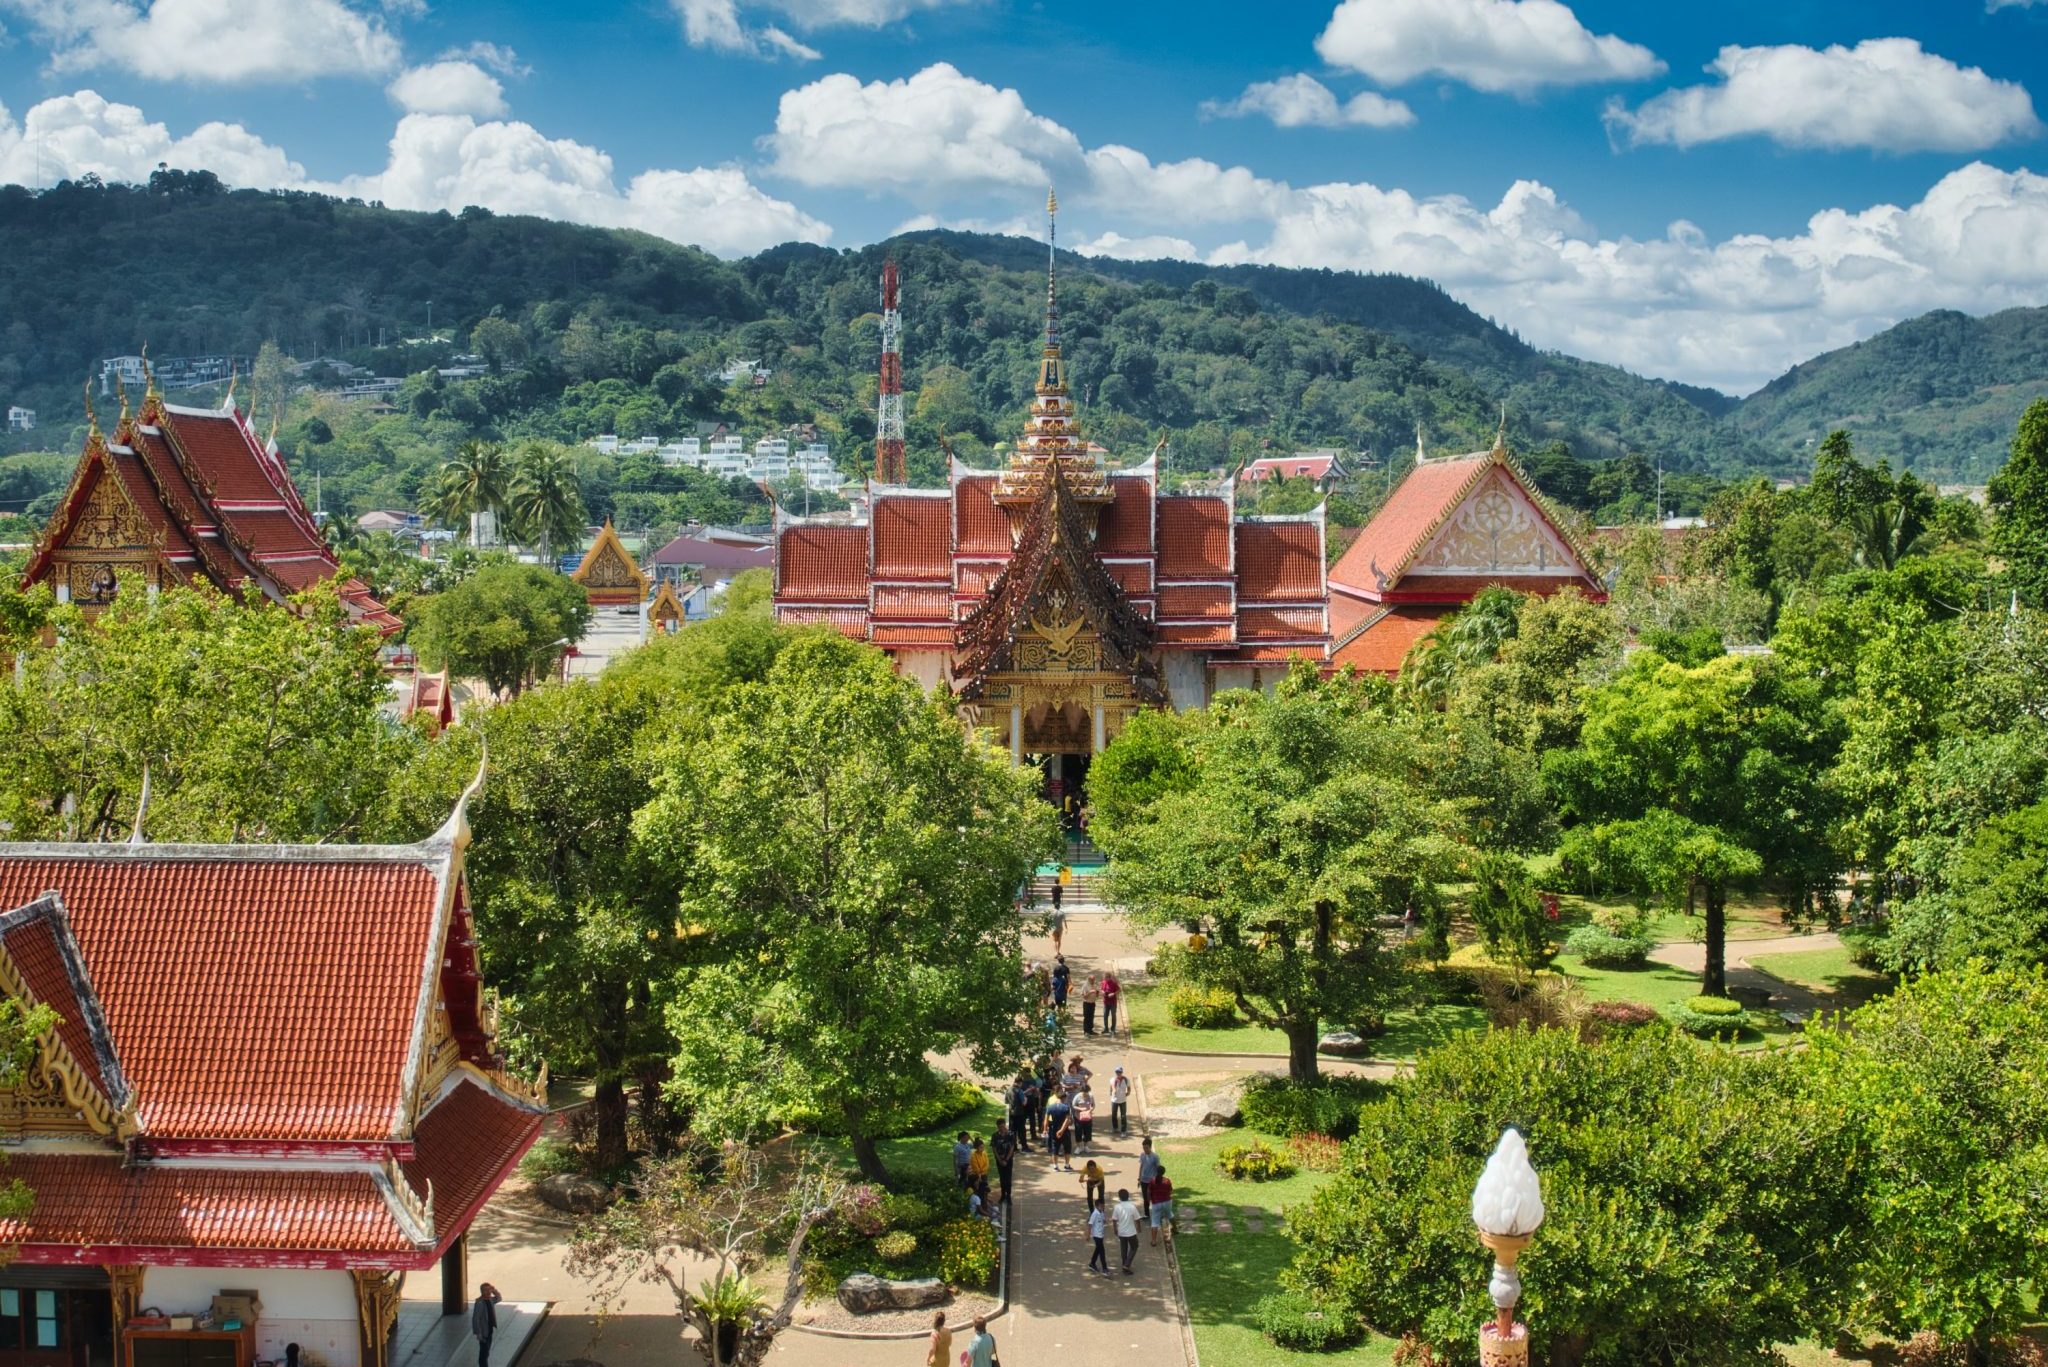 Tourism to destinations such as Phuket is crucial to Thailand's economy, with the sector contributing 11 percent to the country's GDP.